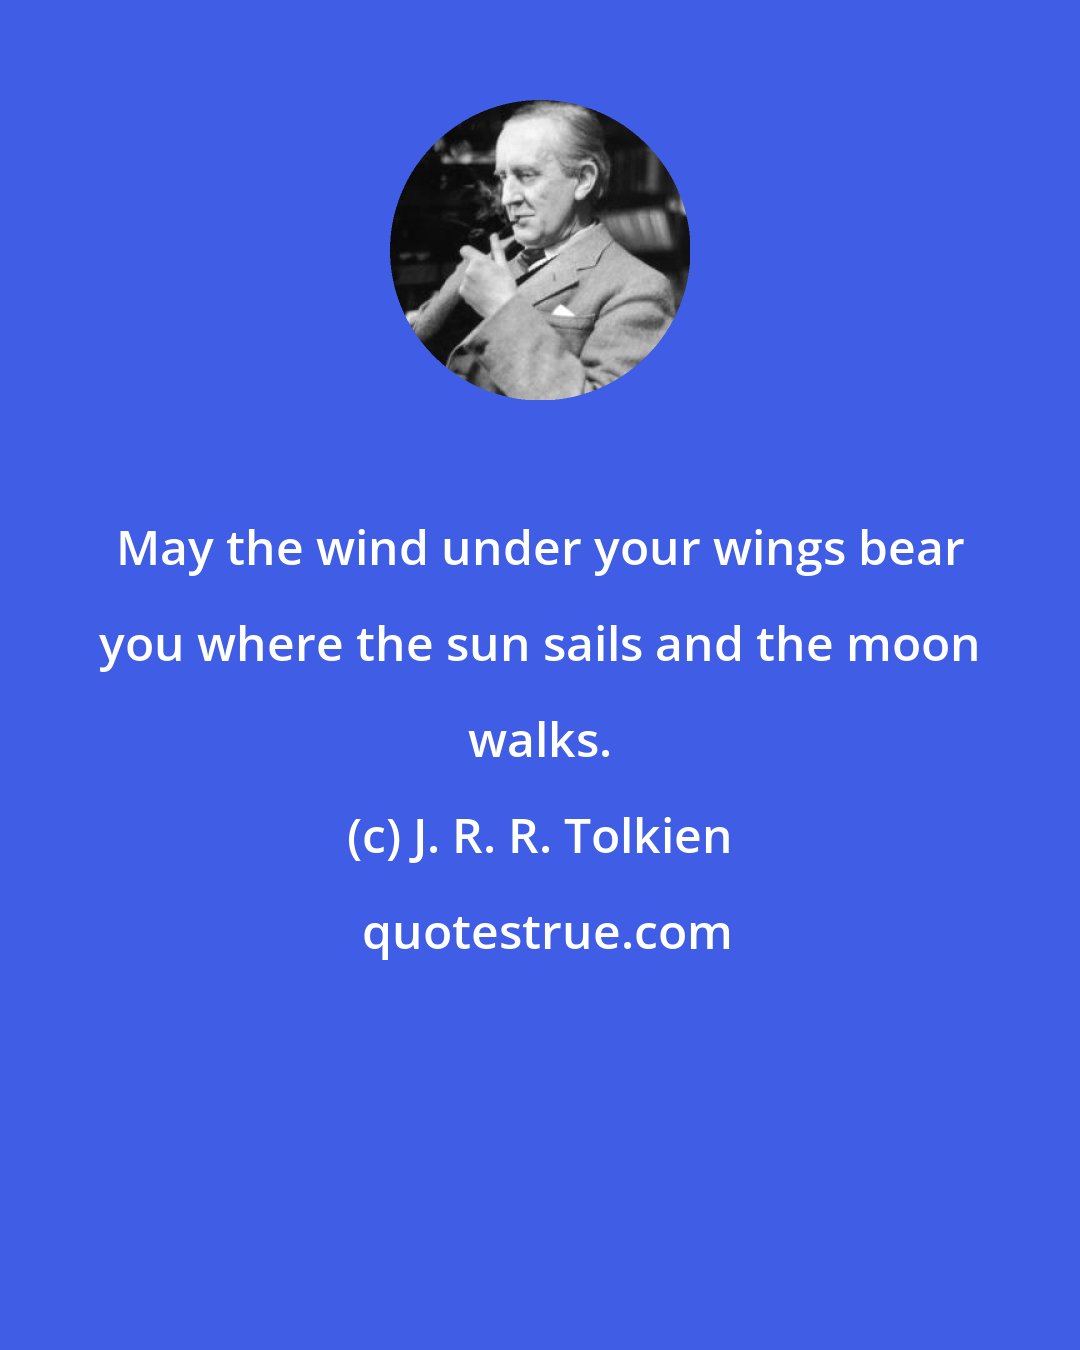 J. R. R. Tolkien: May the wind under your wings bear you where the sun sails and the moon walks.